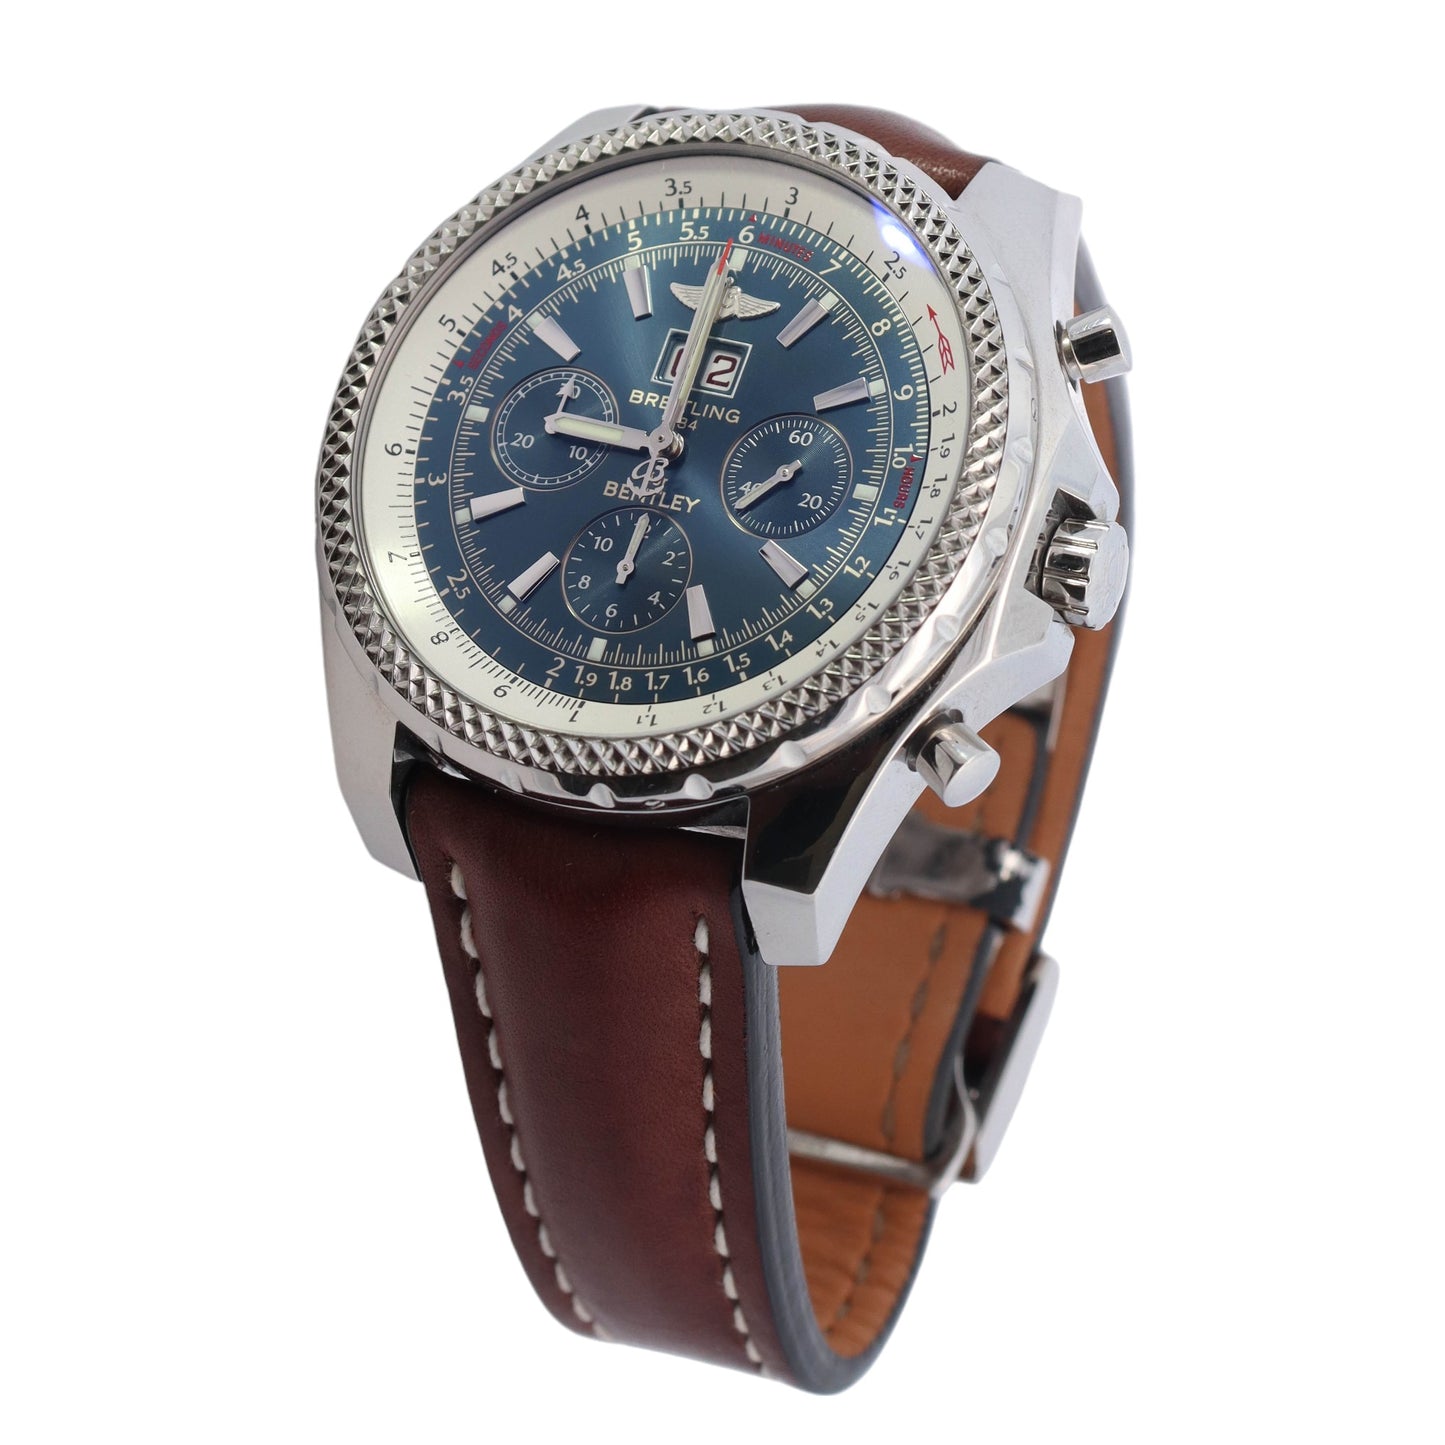 Breitling Bentley Stainless Steel 49mm Blue Chronograph Dial Watch Reference #: A4436212/C652 - Happy Jewelers Fine Jewelry Lifetime Warranty